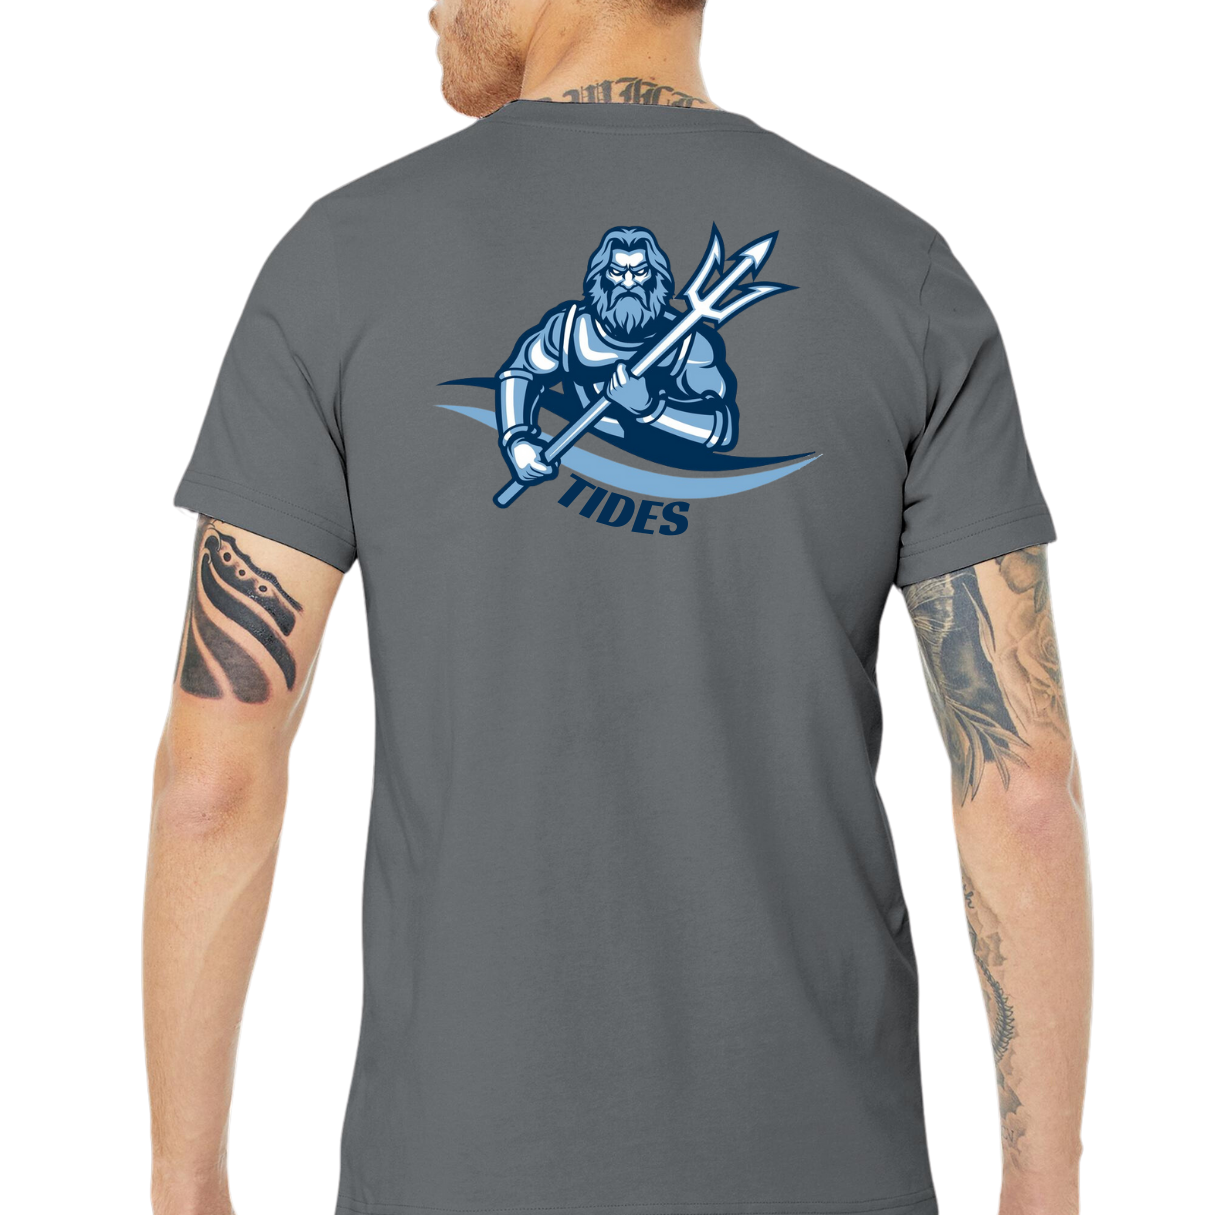 Poseidon Has Your Back Tee- Adult and Youth